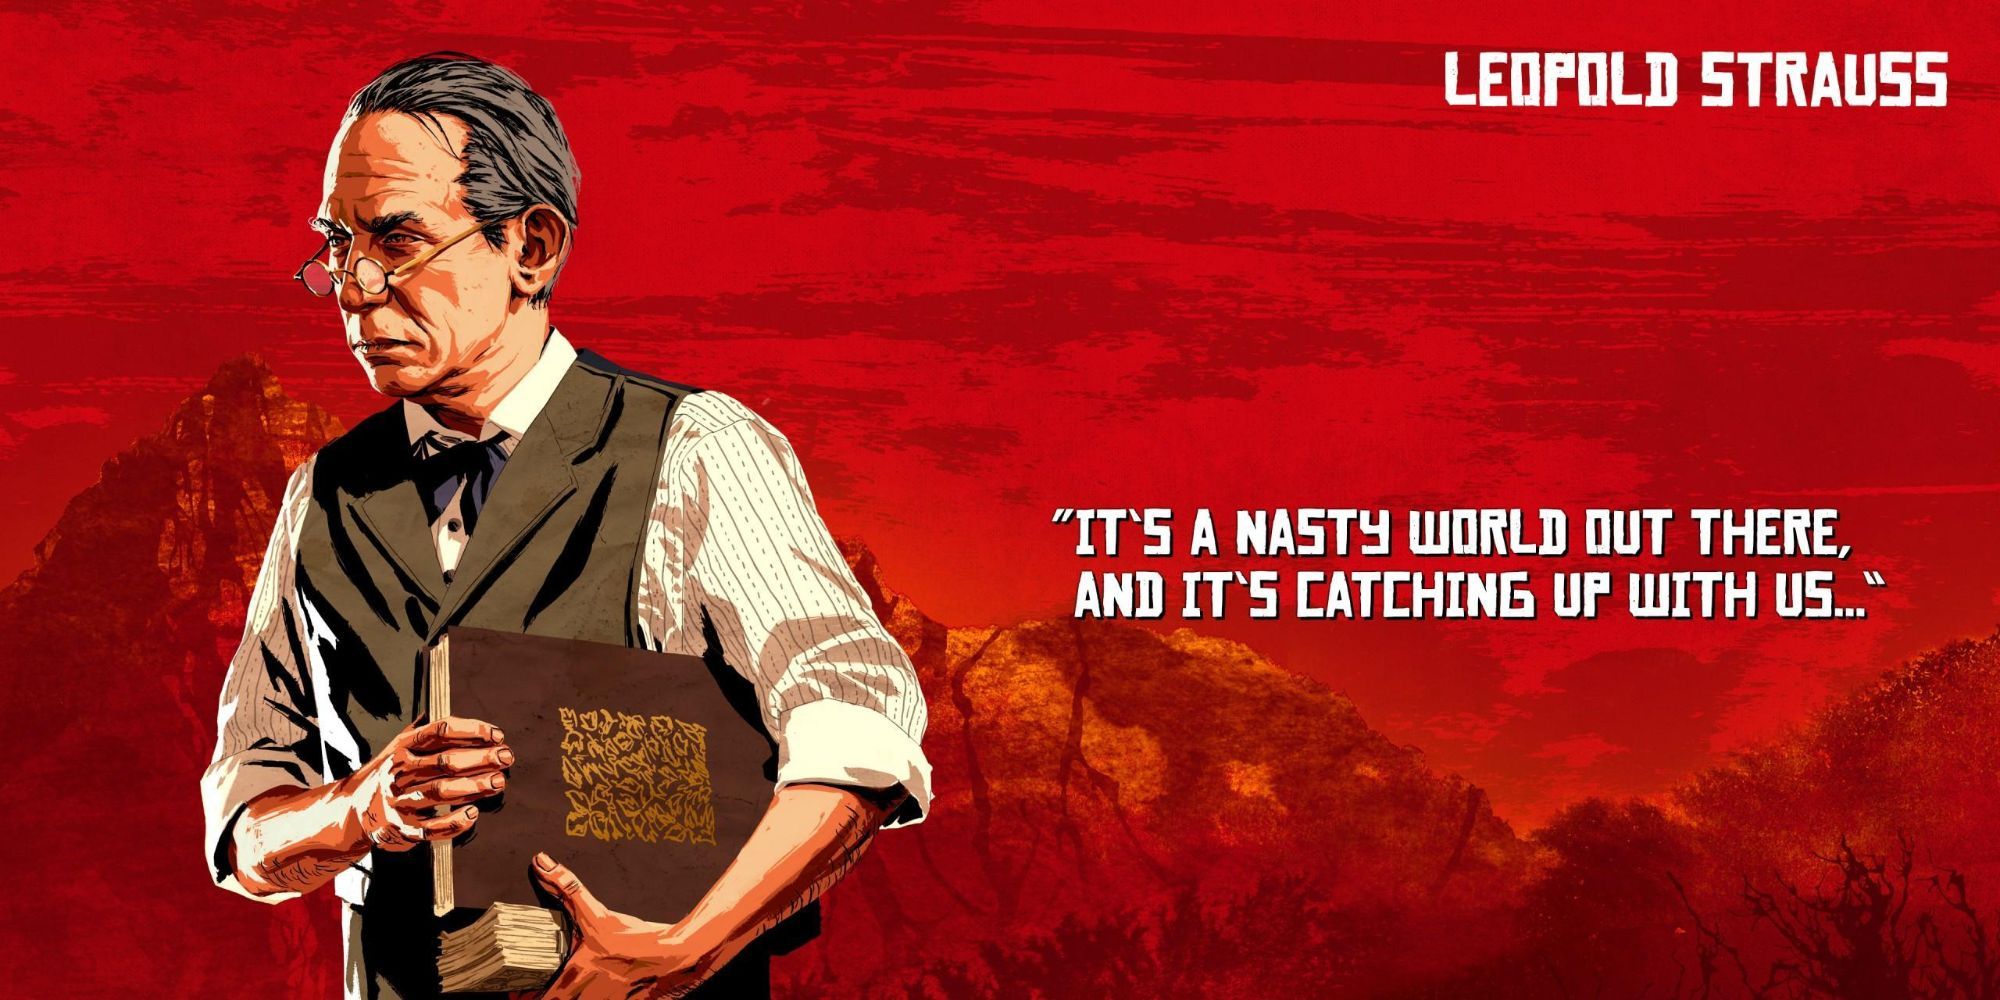 RDR2 art of Strauss with quote